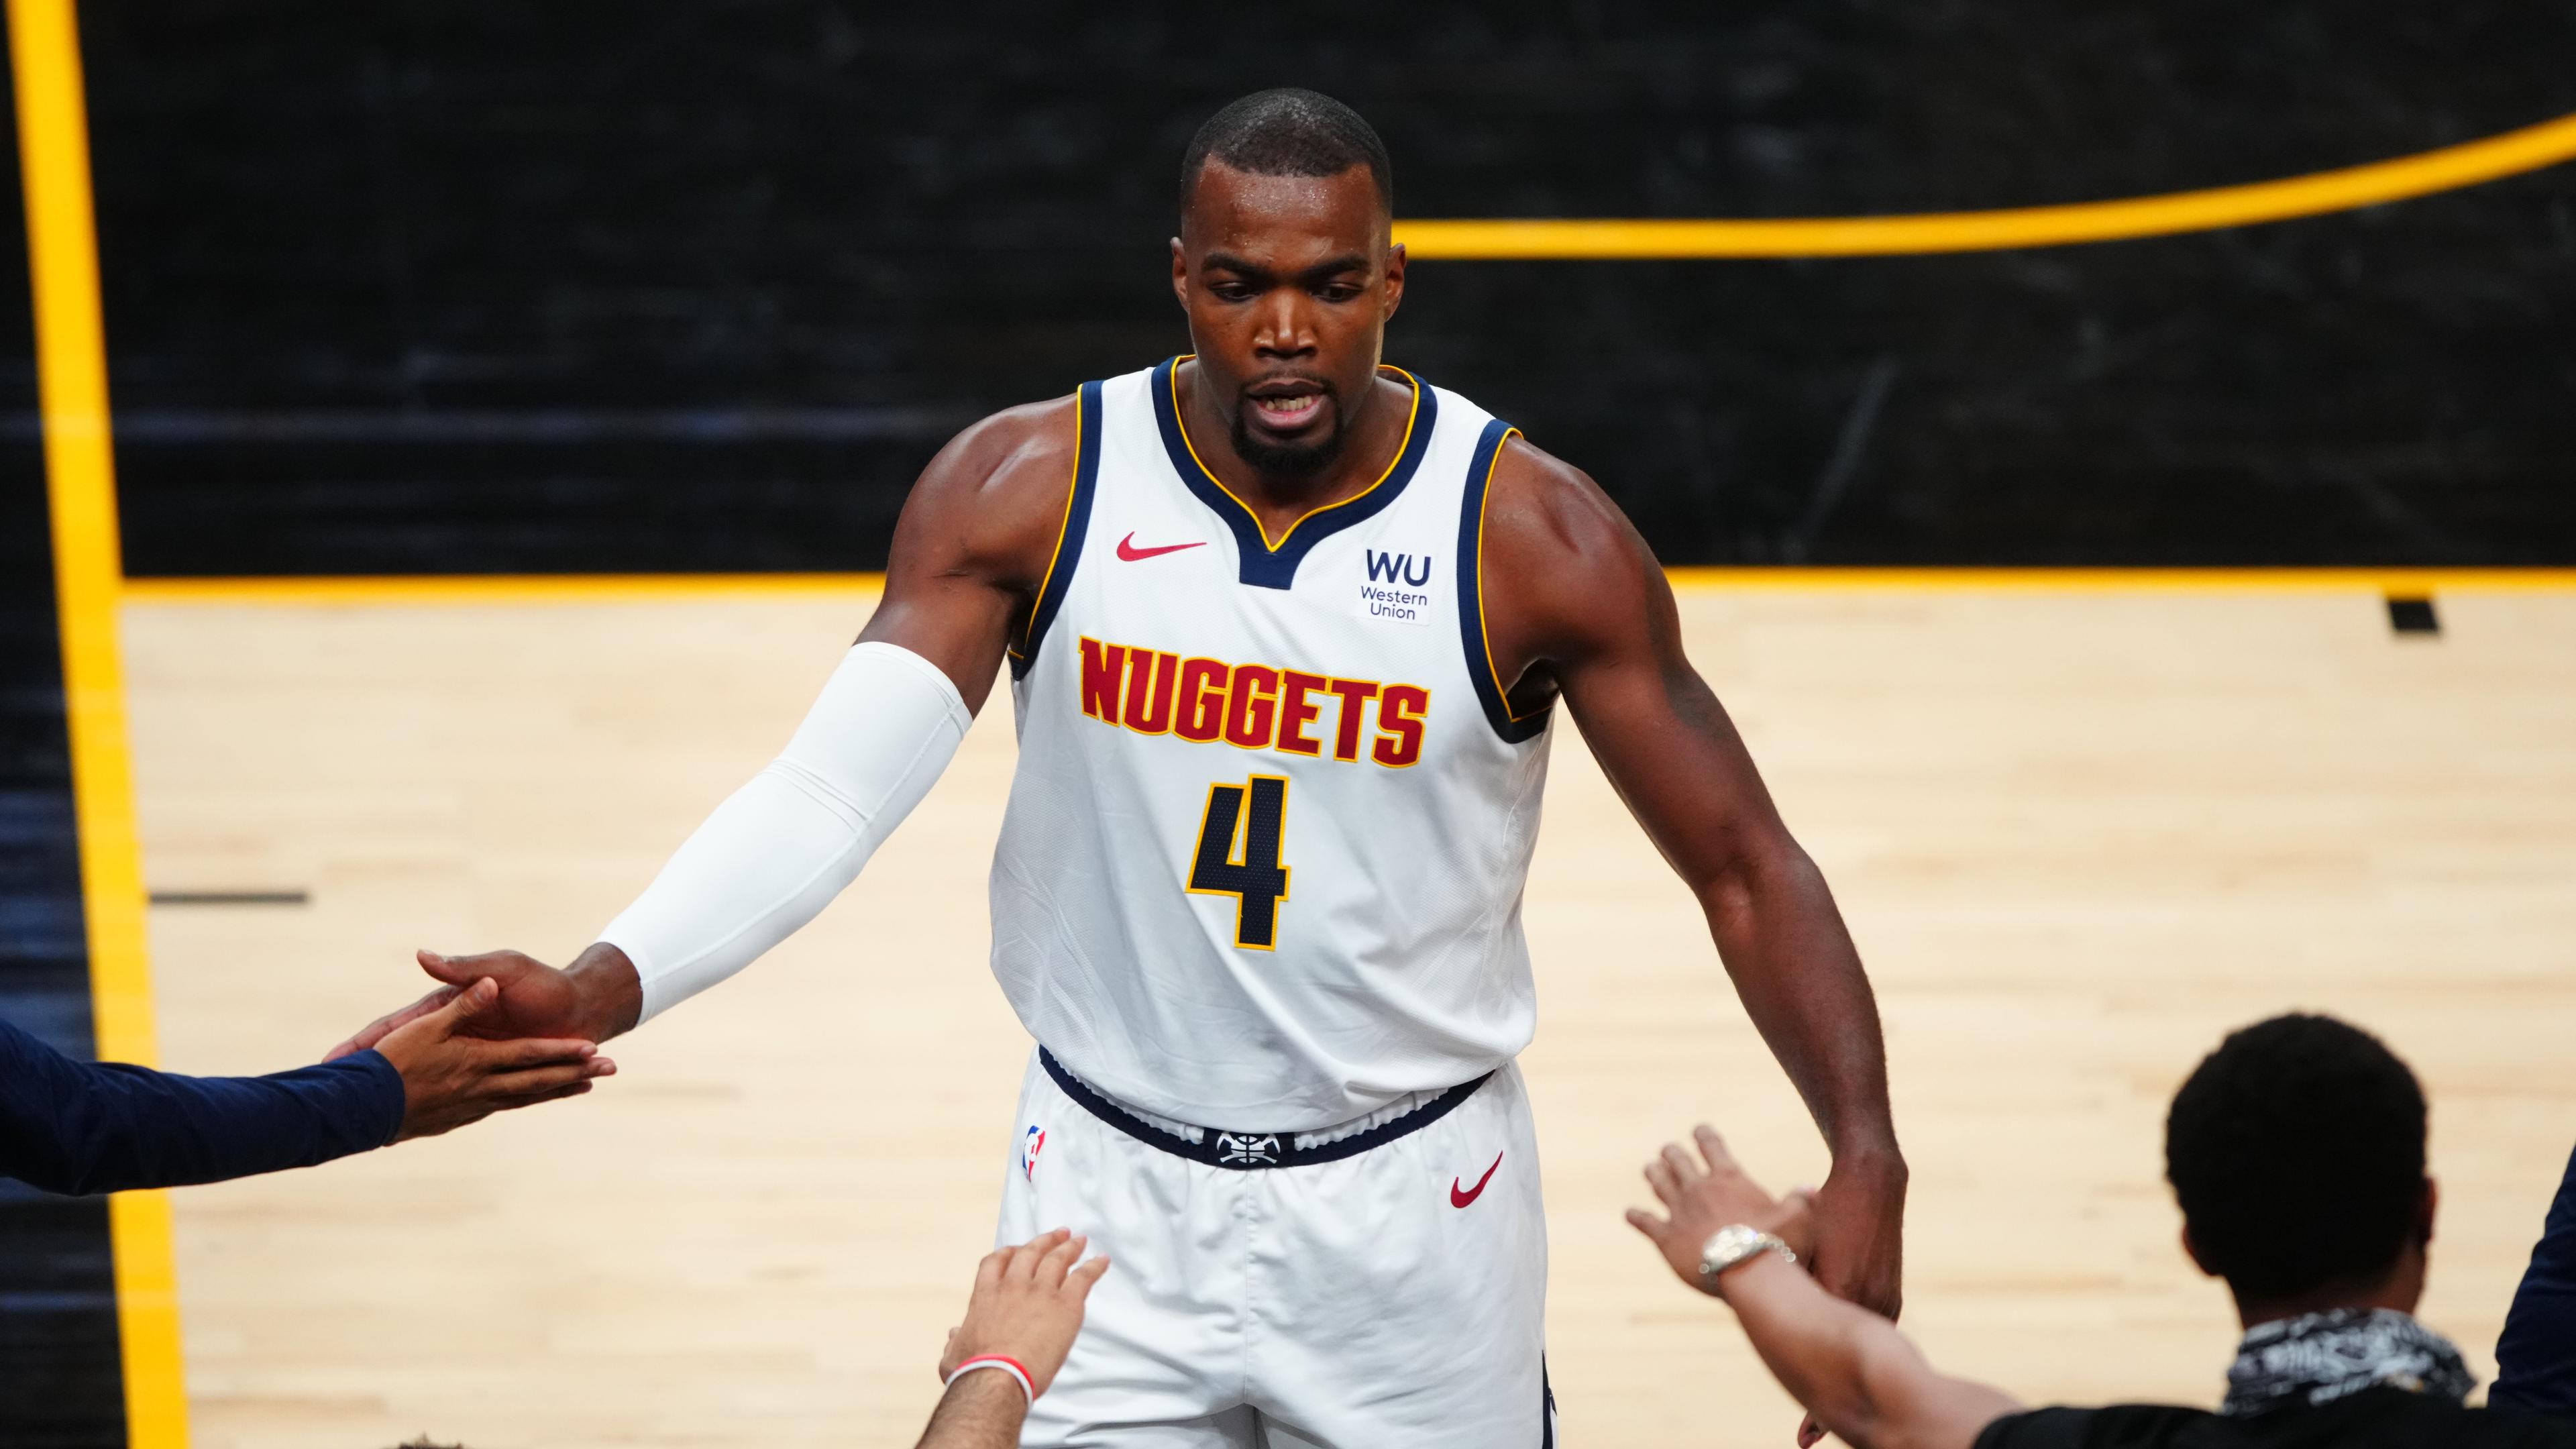 Jun 7, 2021; Phoenix, Arizona, USA; Denver Nuggets forward Paul Millsap (4) against the Phoenix Suns during game one in the second round of the 2021 NBA Playoffs at Phoenix Suns Arena. Mandatory Credit: Mark J. Rebilas-USA TODAY Sports / Mark J. Rebilas-USA TODAY Sports